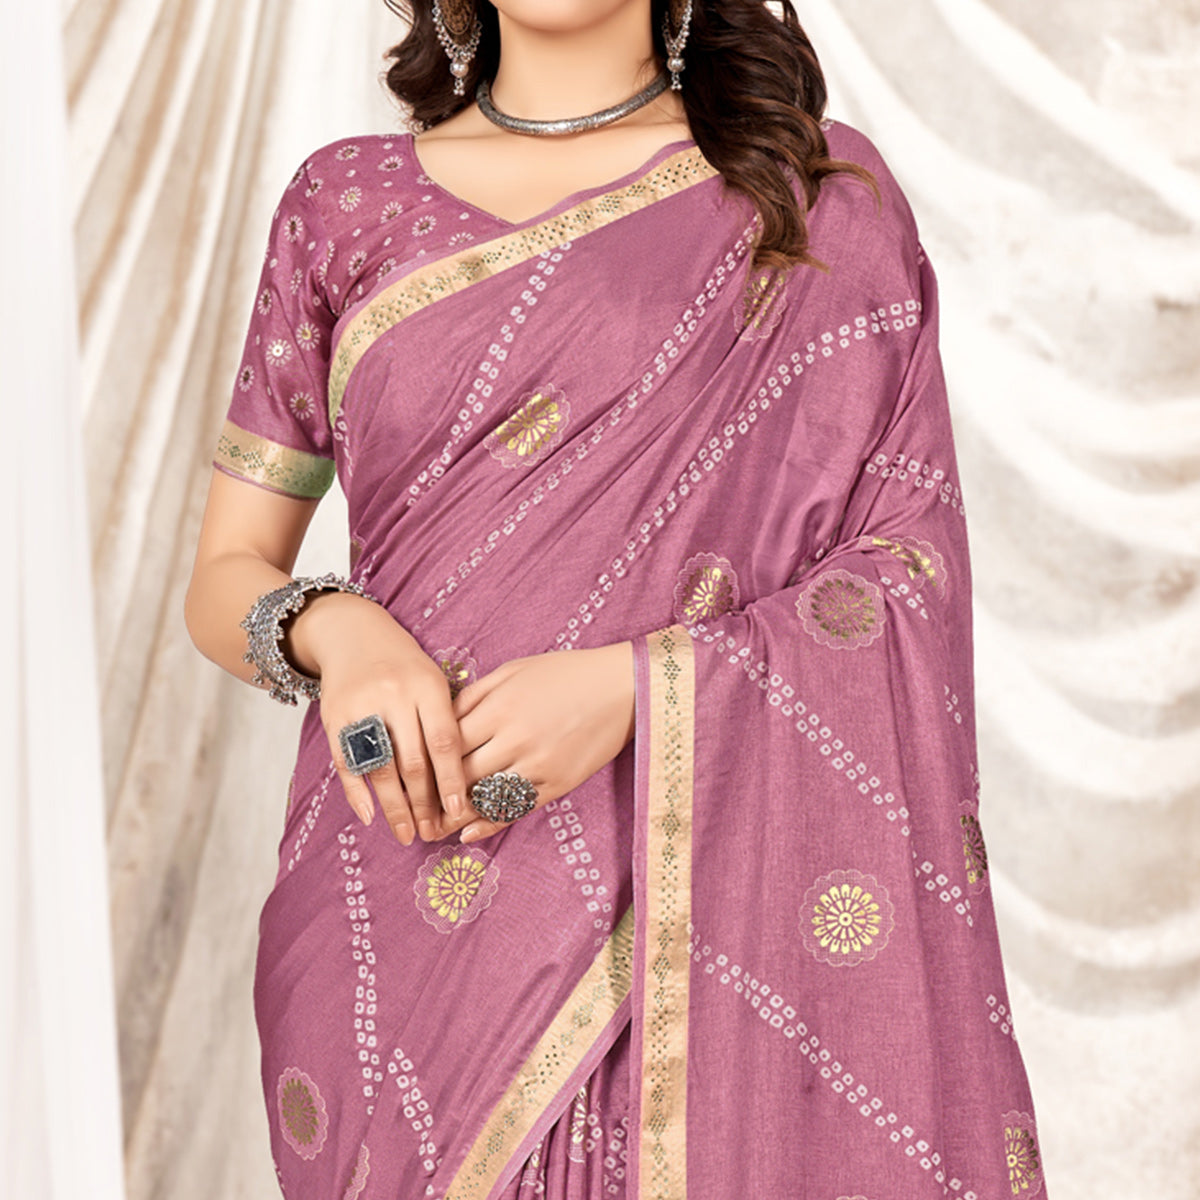 Dusty Pink Foil Printed Tussar Silk Saree With Tassels